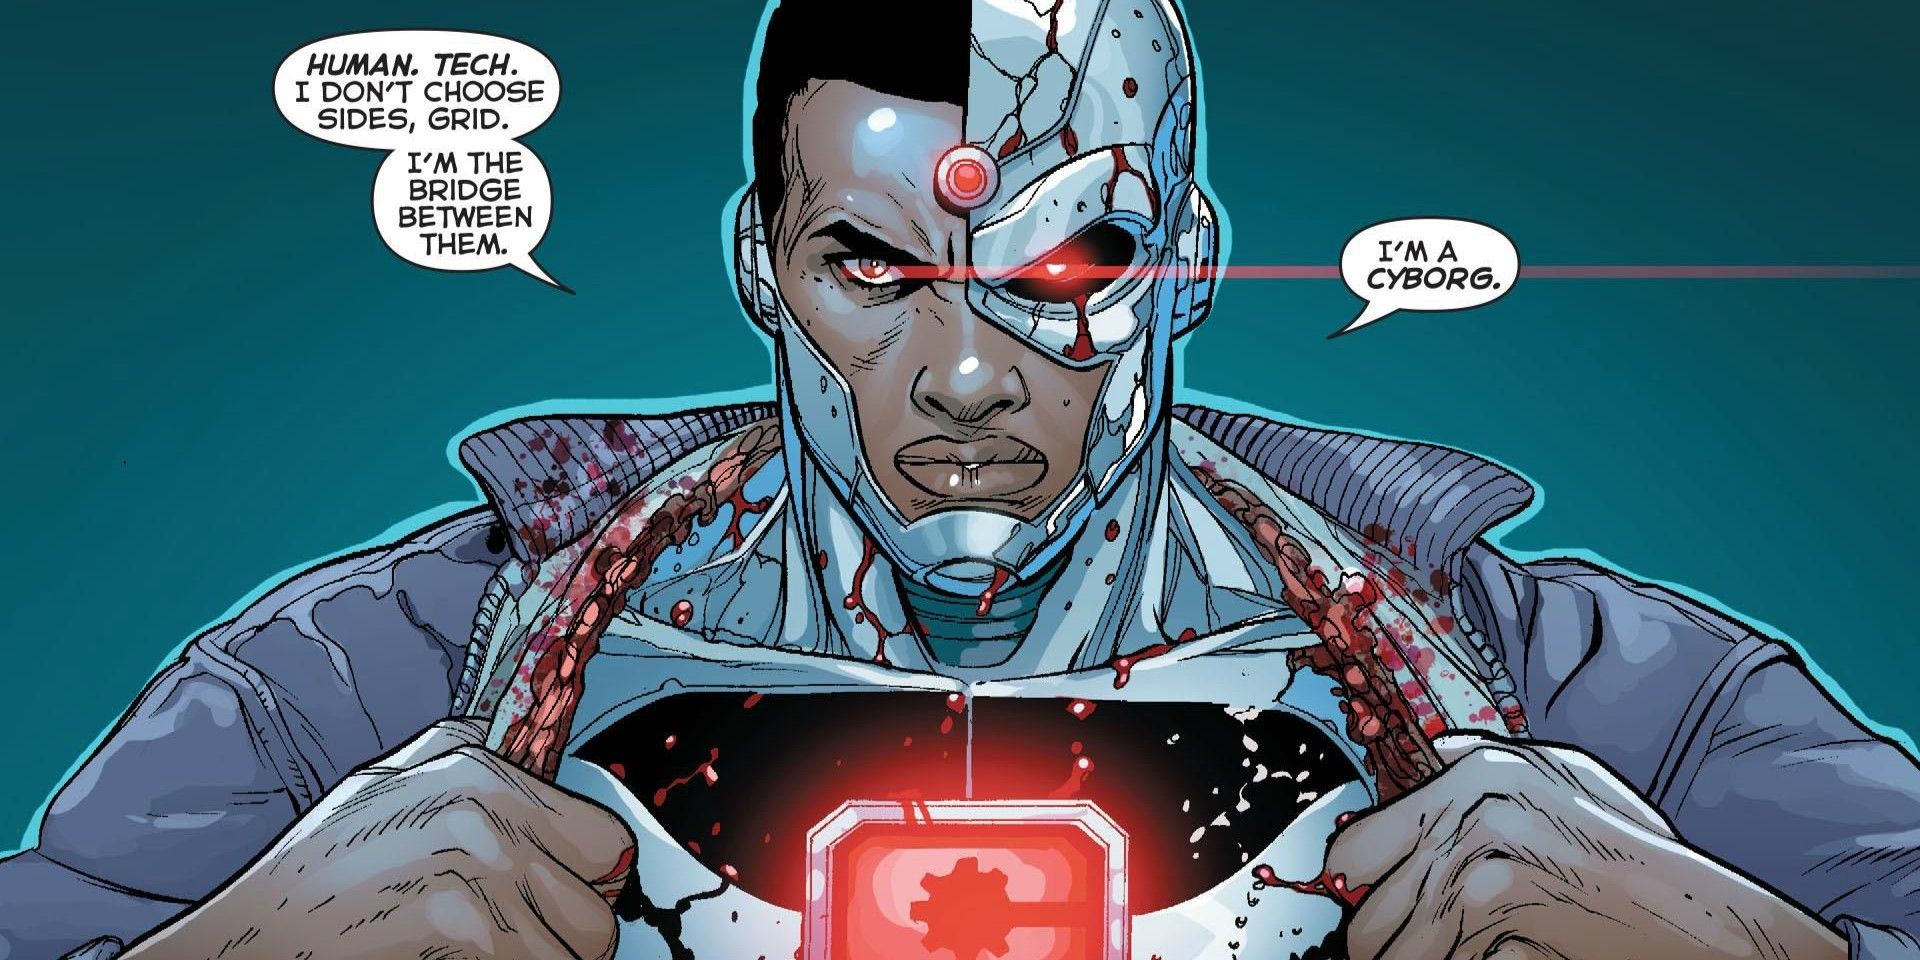 A comic book drawing of Cyborg staring directly at the camera and pulling apart a bloody jacket to reveal his metal prostheses chest. The dialogue bubbles read: 